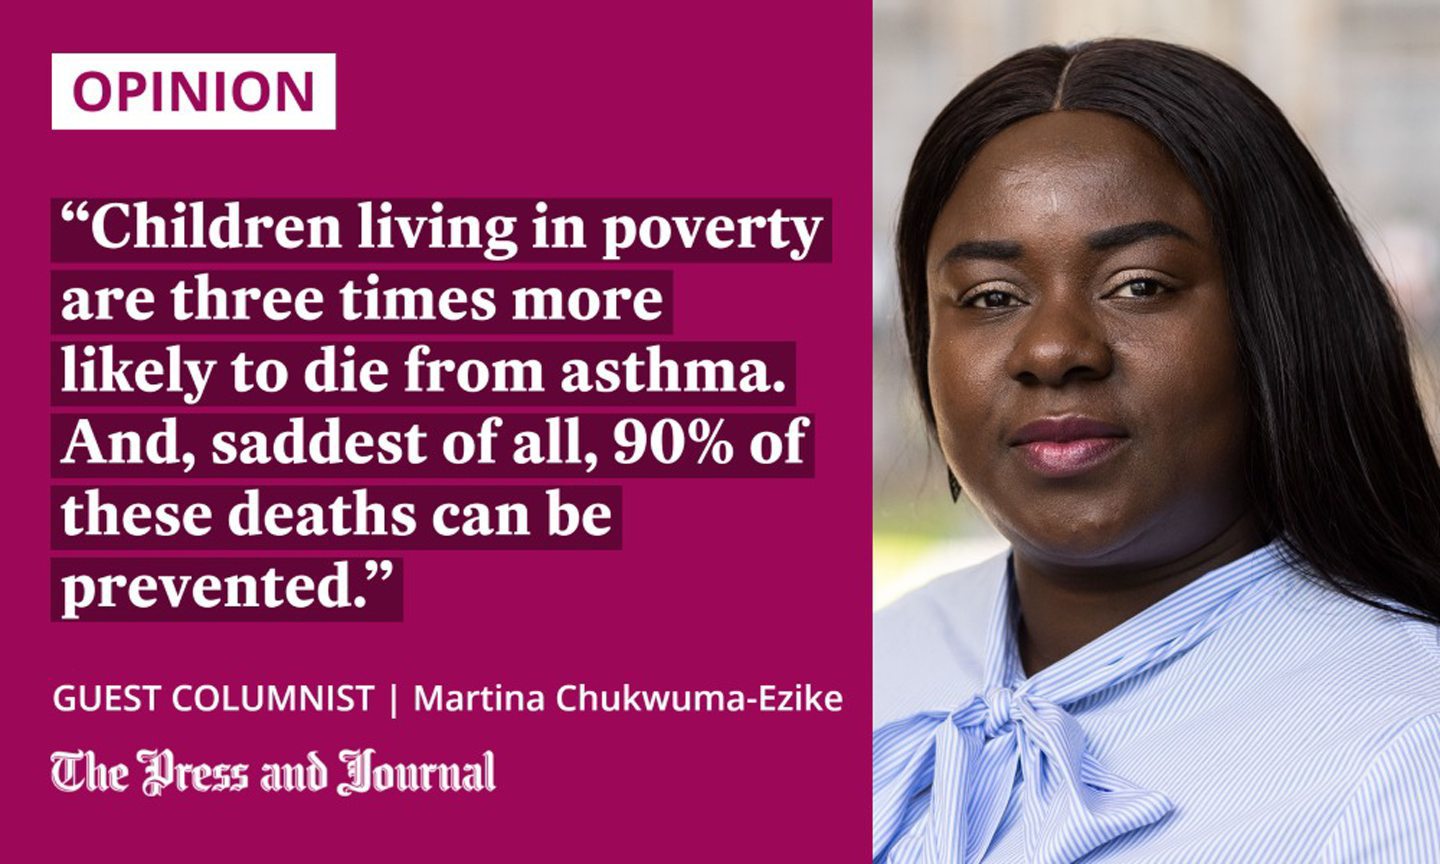 Guest columnist, Martina Chukwuma-Ezike, speaks out about poverty and asthma: "Children living in poverty are three times more likely to die from the condition. And, saddest of all, 90% of all asthma deaths can be prevented."